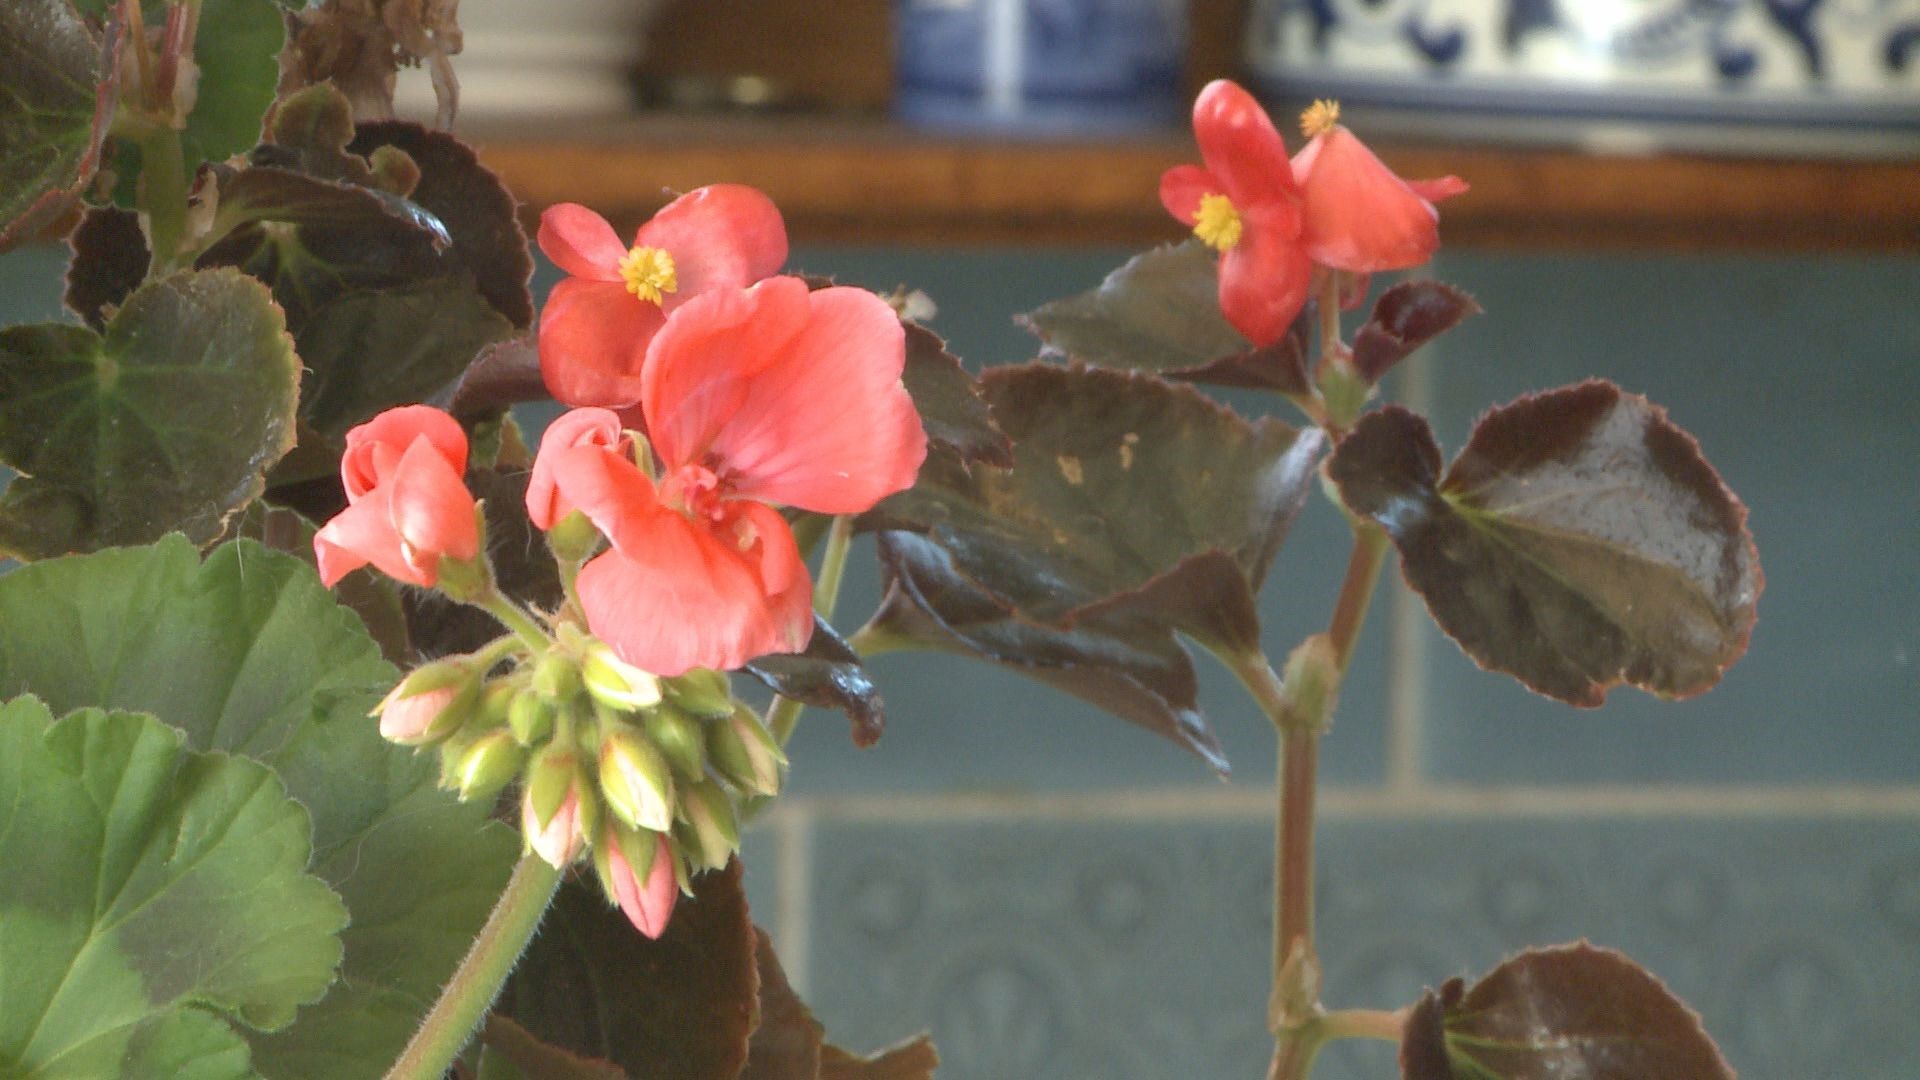 9NEWS Garden Expert Rob Proctor and friends show you how to care for and propagate geraniums.